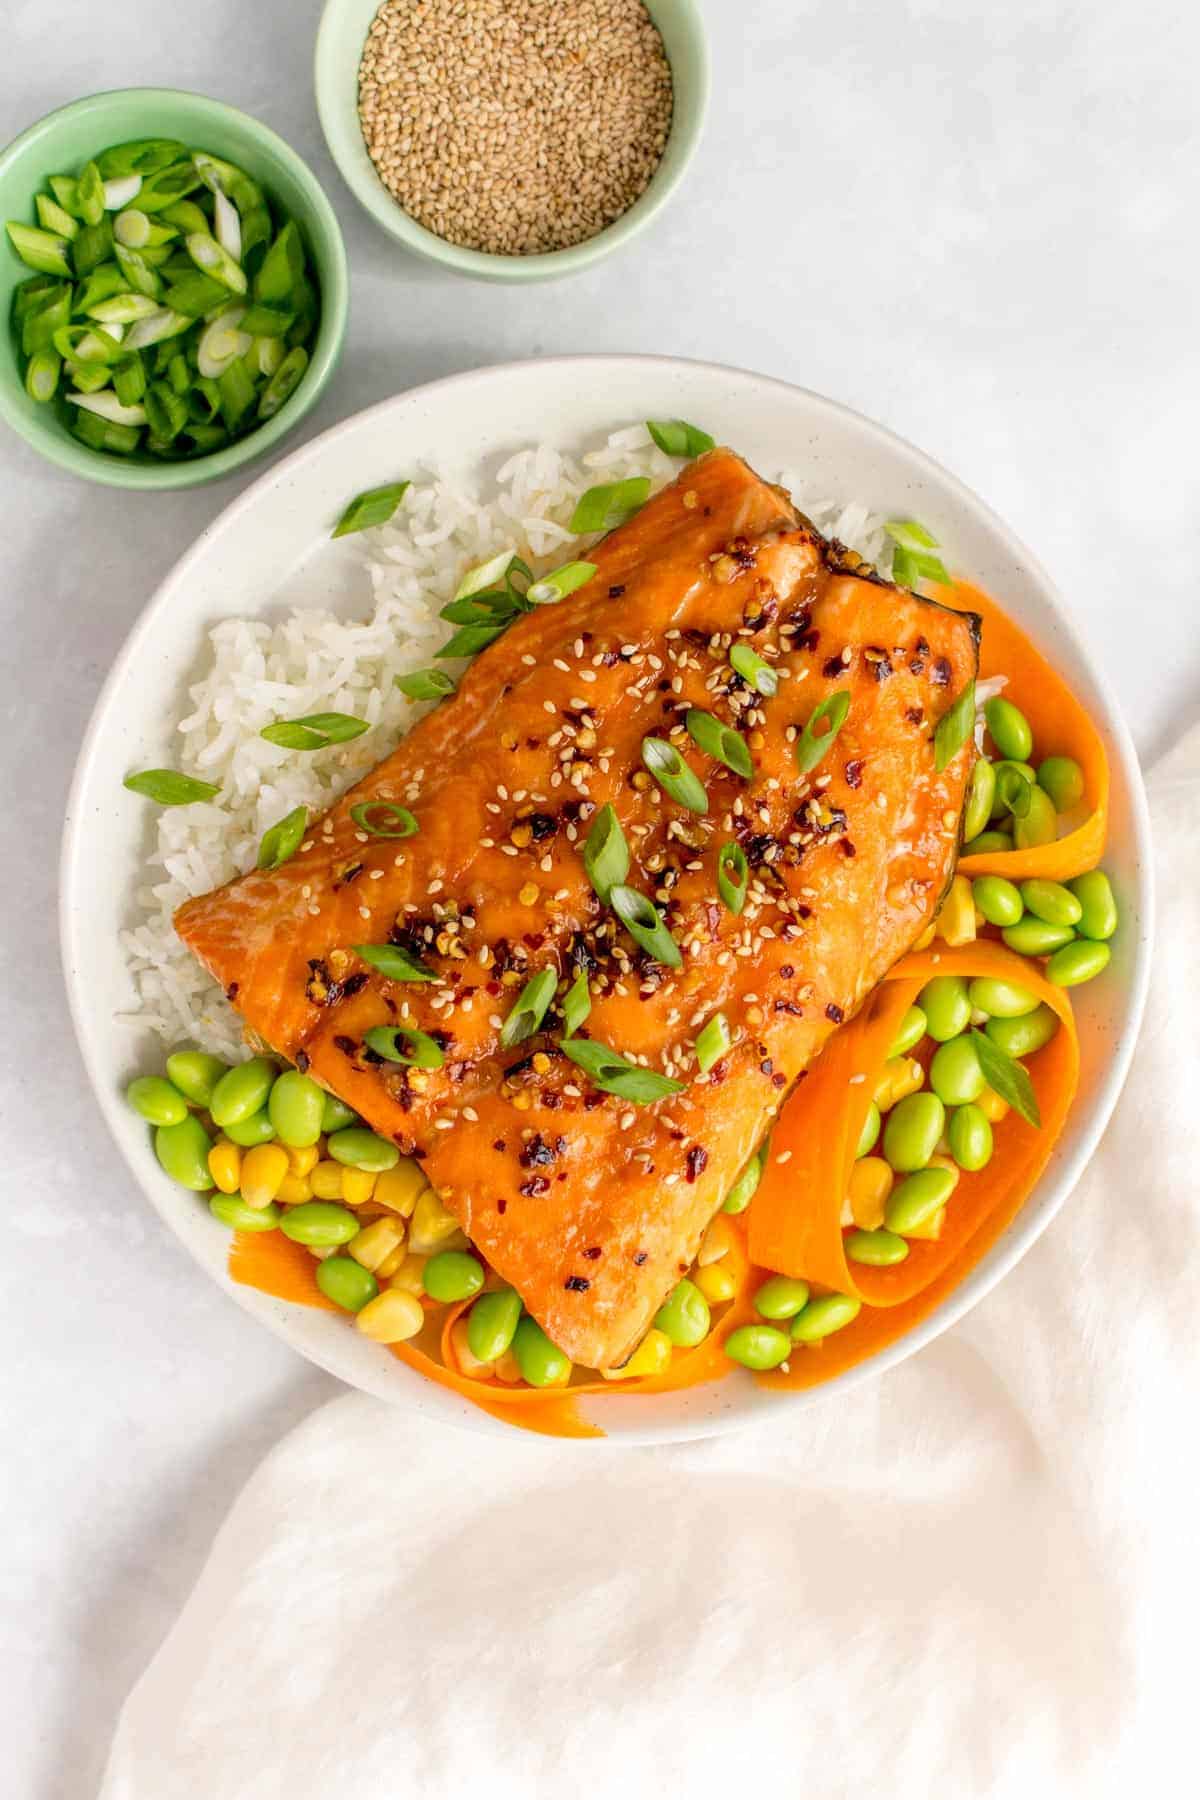 A plate with rice, corn, edamame, carrots, and sweet chili salmon.